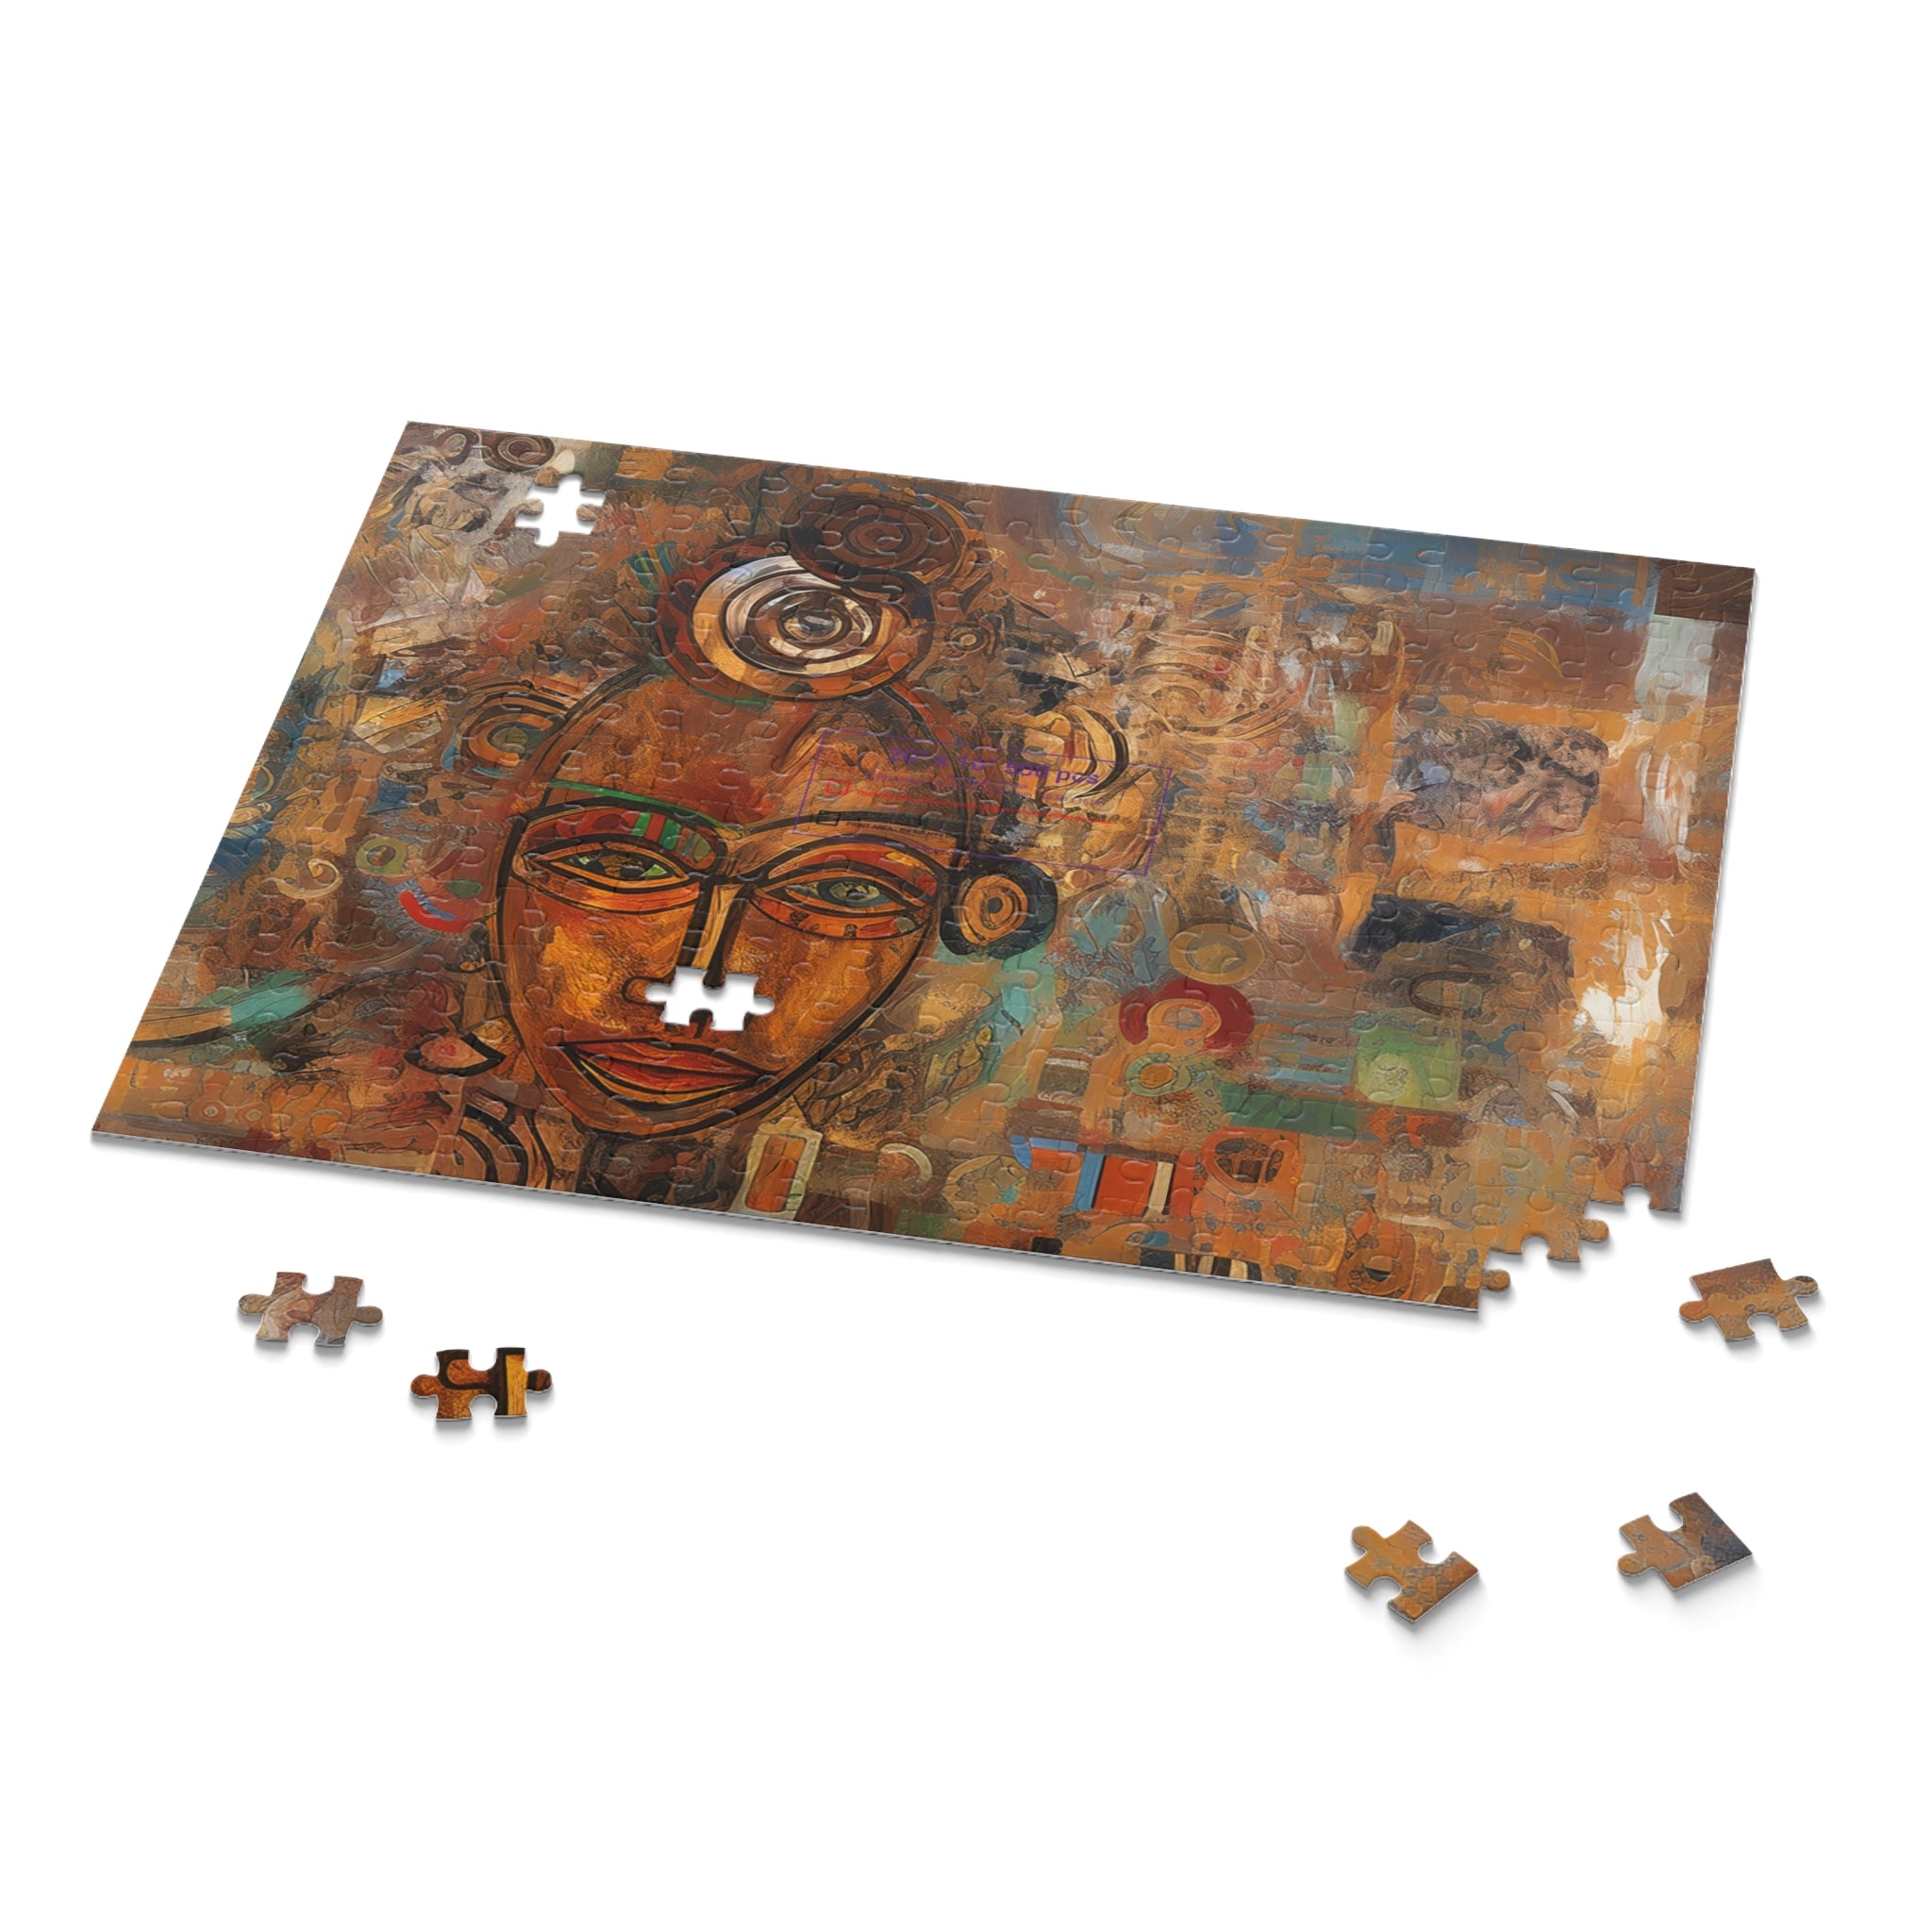 Puzzle building view of 11x14 African Abstract Art Puzzle.